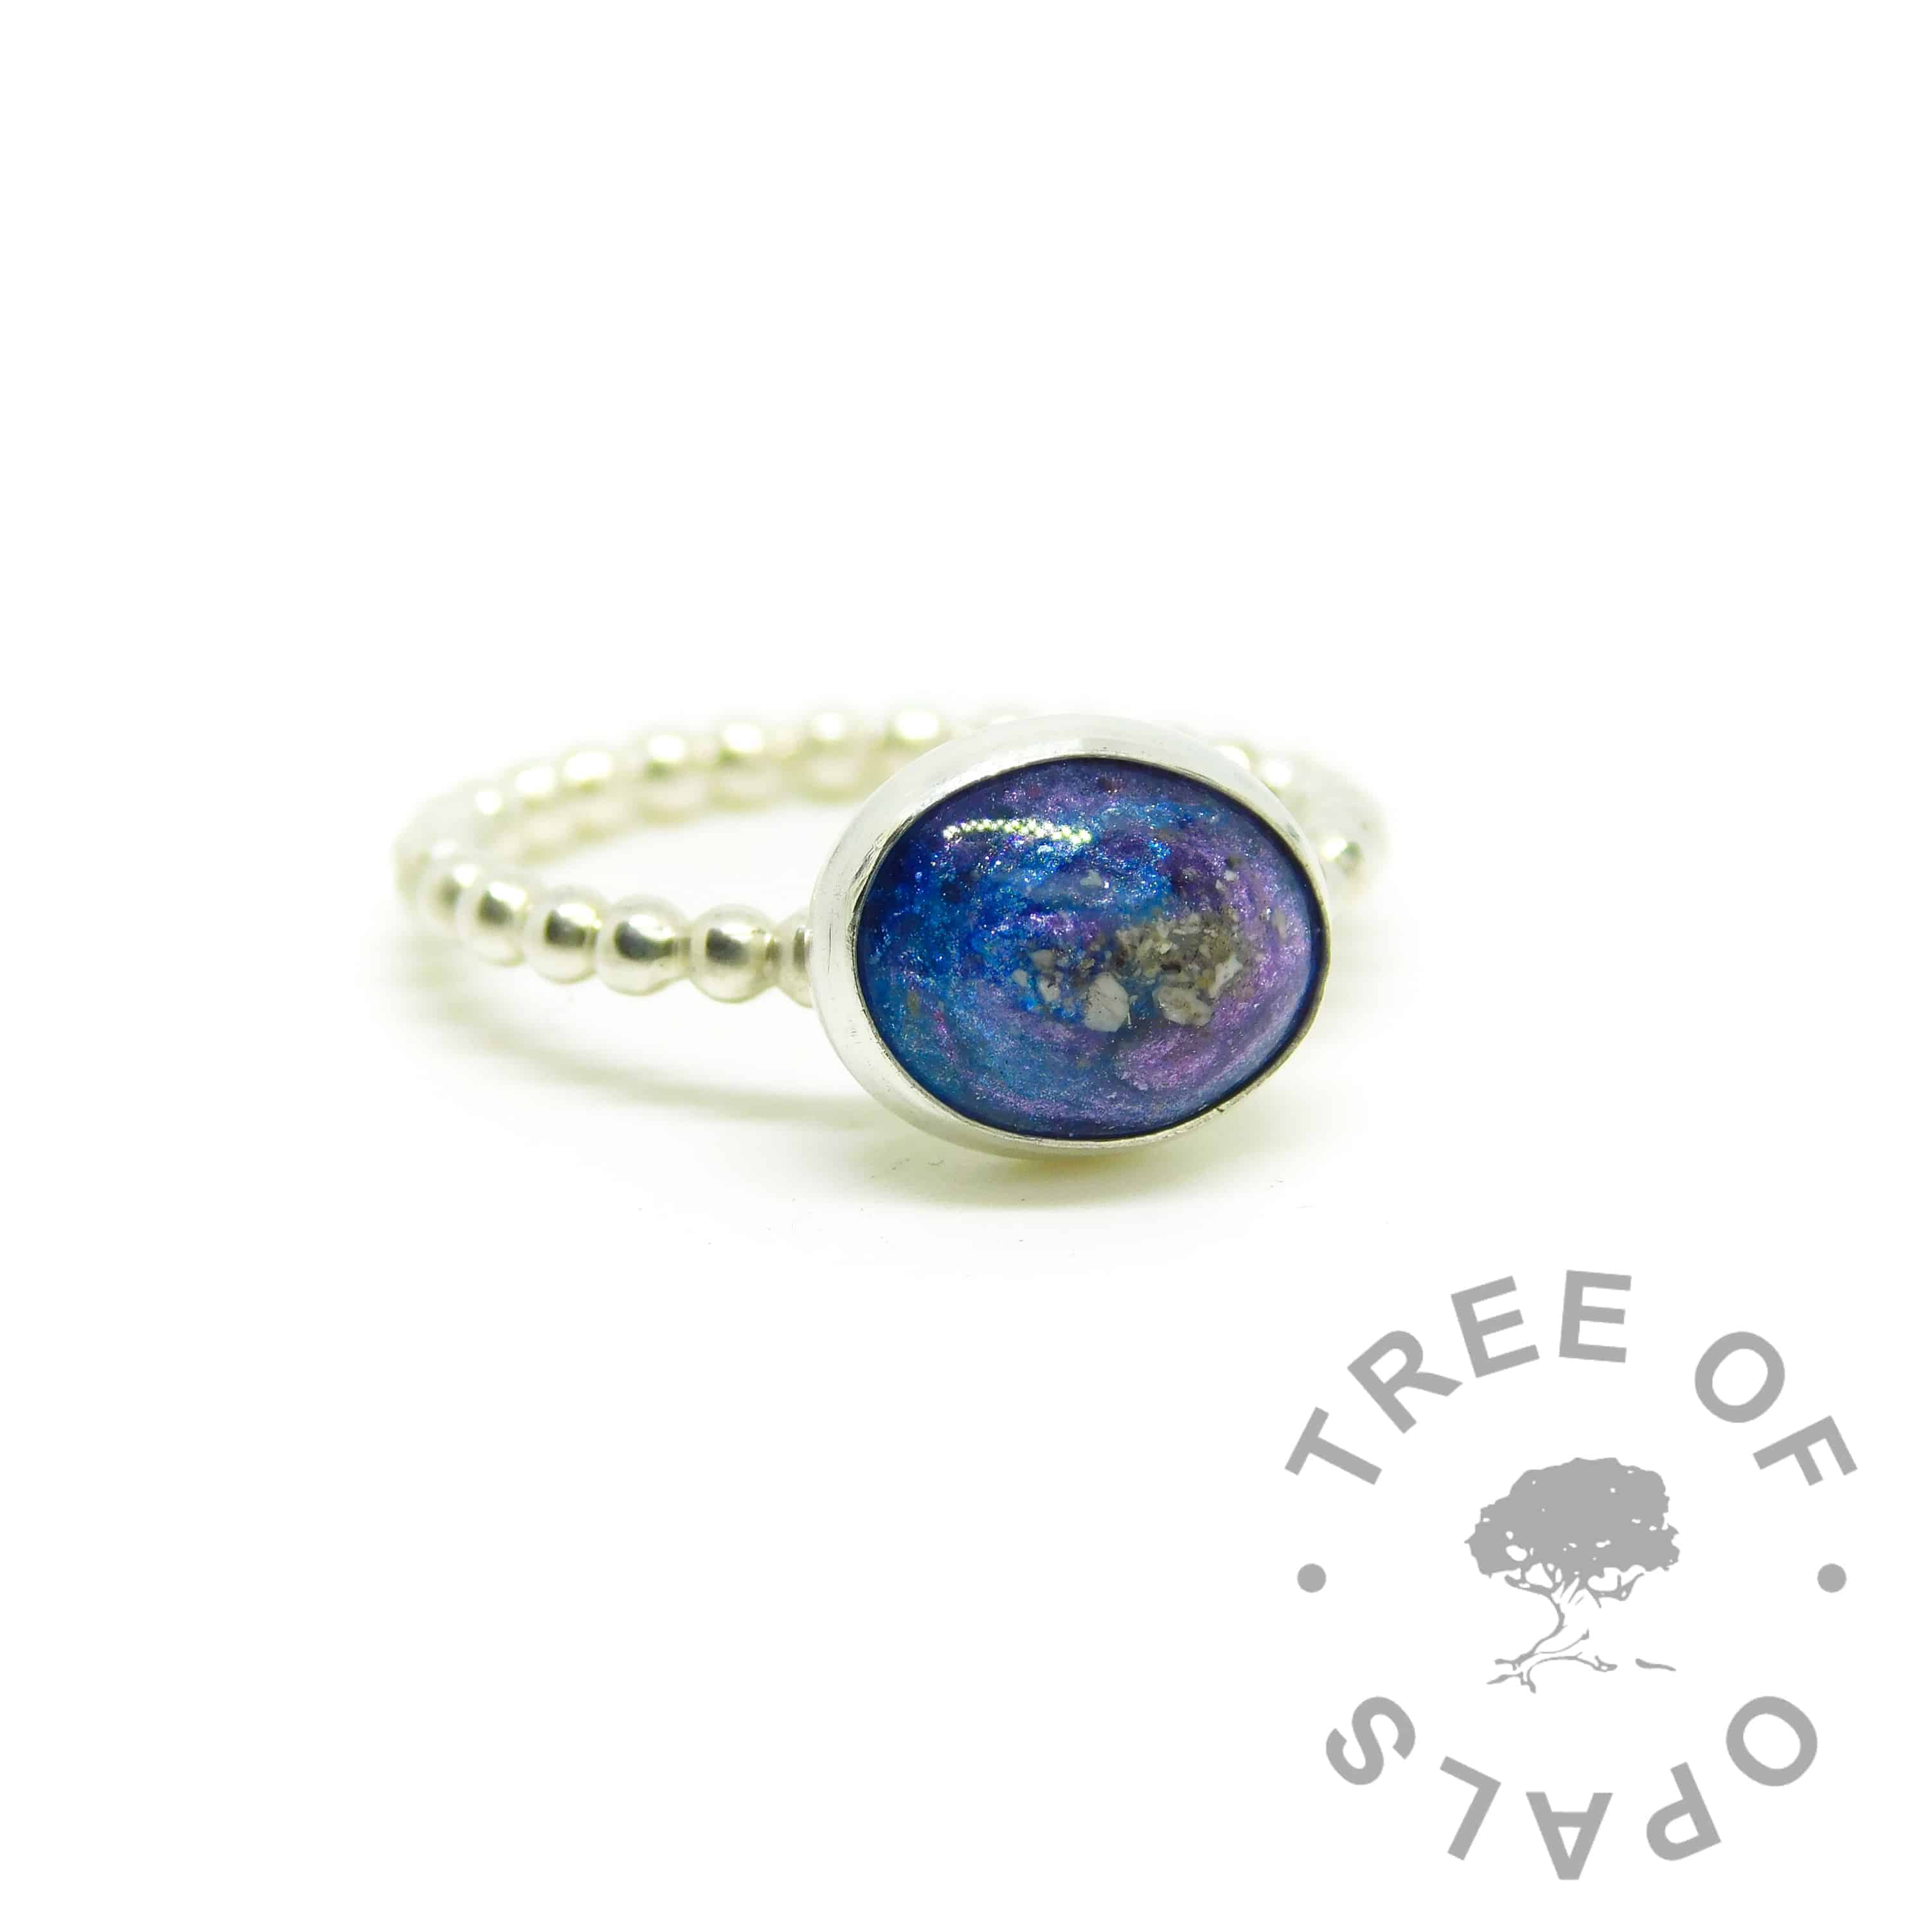 ashes jewellery bubble band ring, cremation ashes with blue and purple resin sparkle mixes swirled together